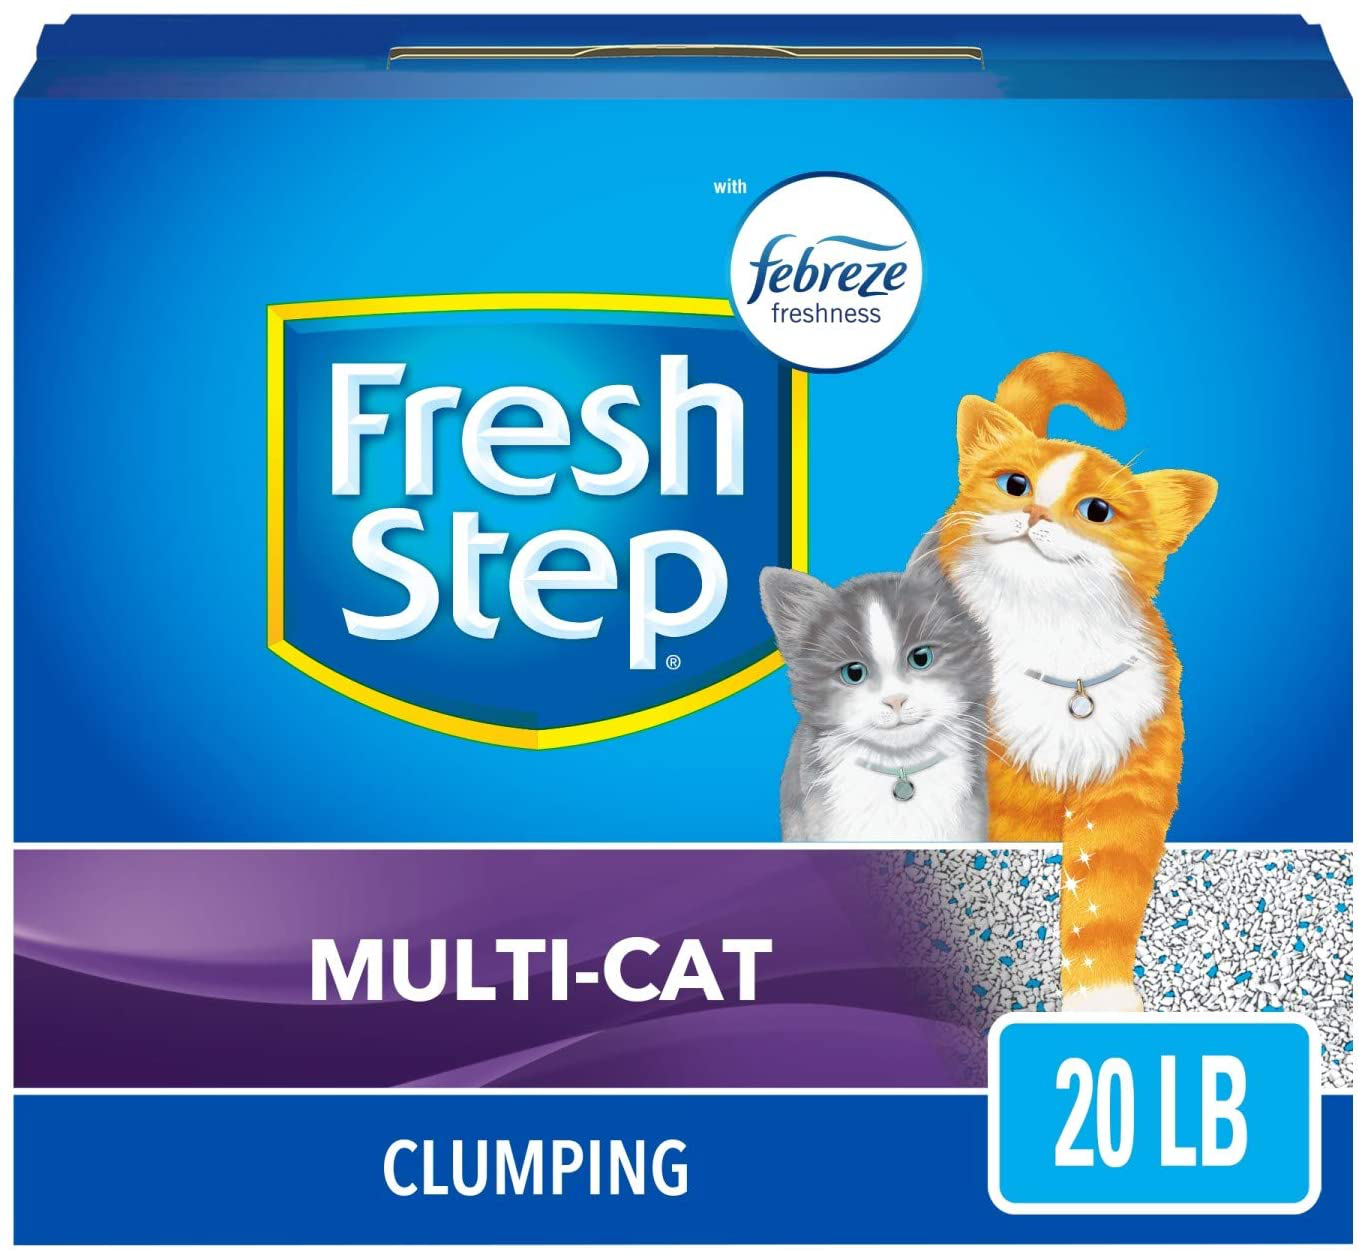 Fresh Step Multi-Cat Extra Strength Scented Litter with the Power of Febreze, Clumping Cat Litter, 20 Pounds (Package May Vary)